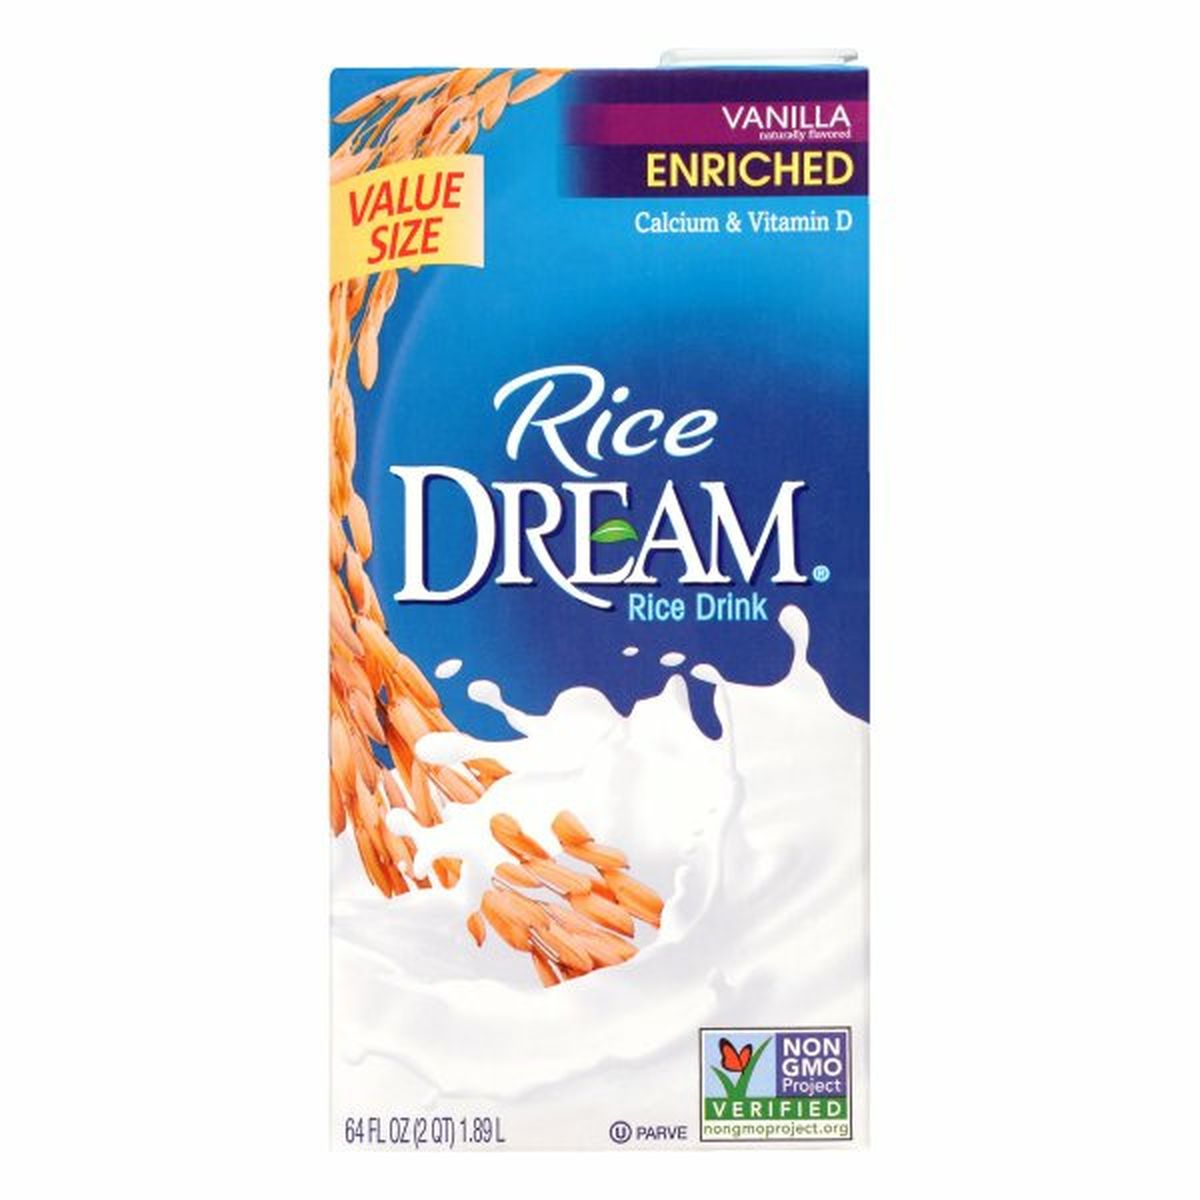 Calories in Rice DREAM Rice Drink, Enriched, Vanilla, Value Size